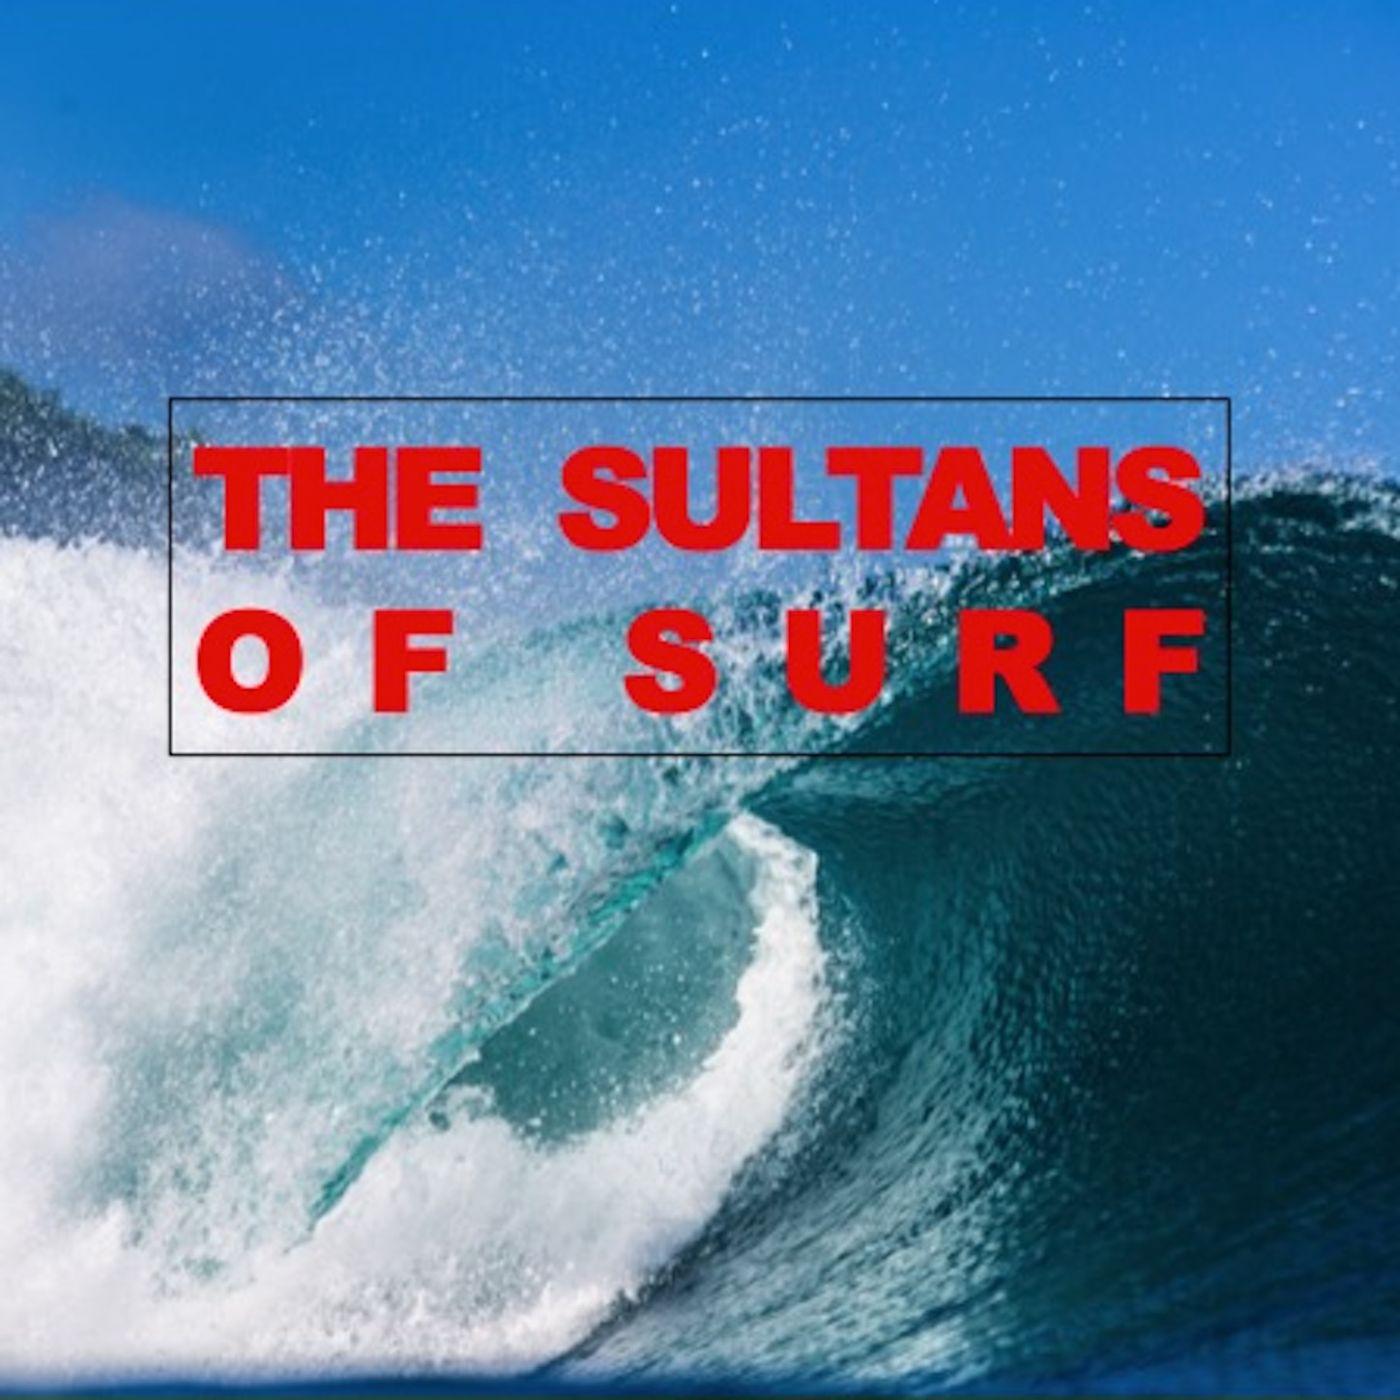 The Sultans of Surf